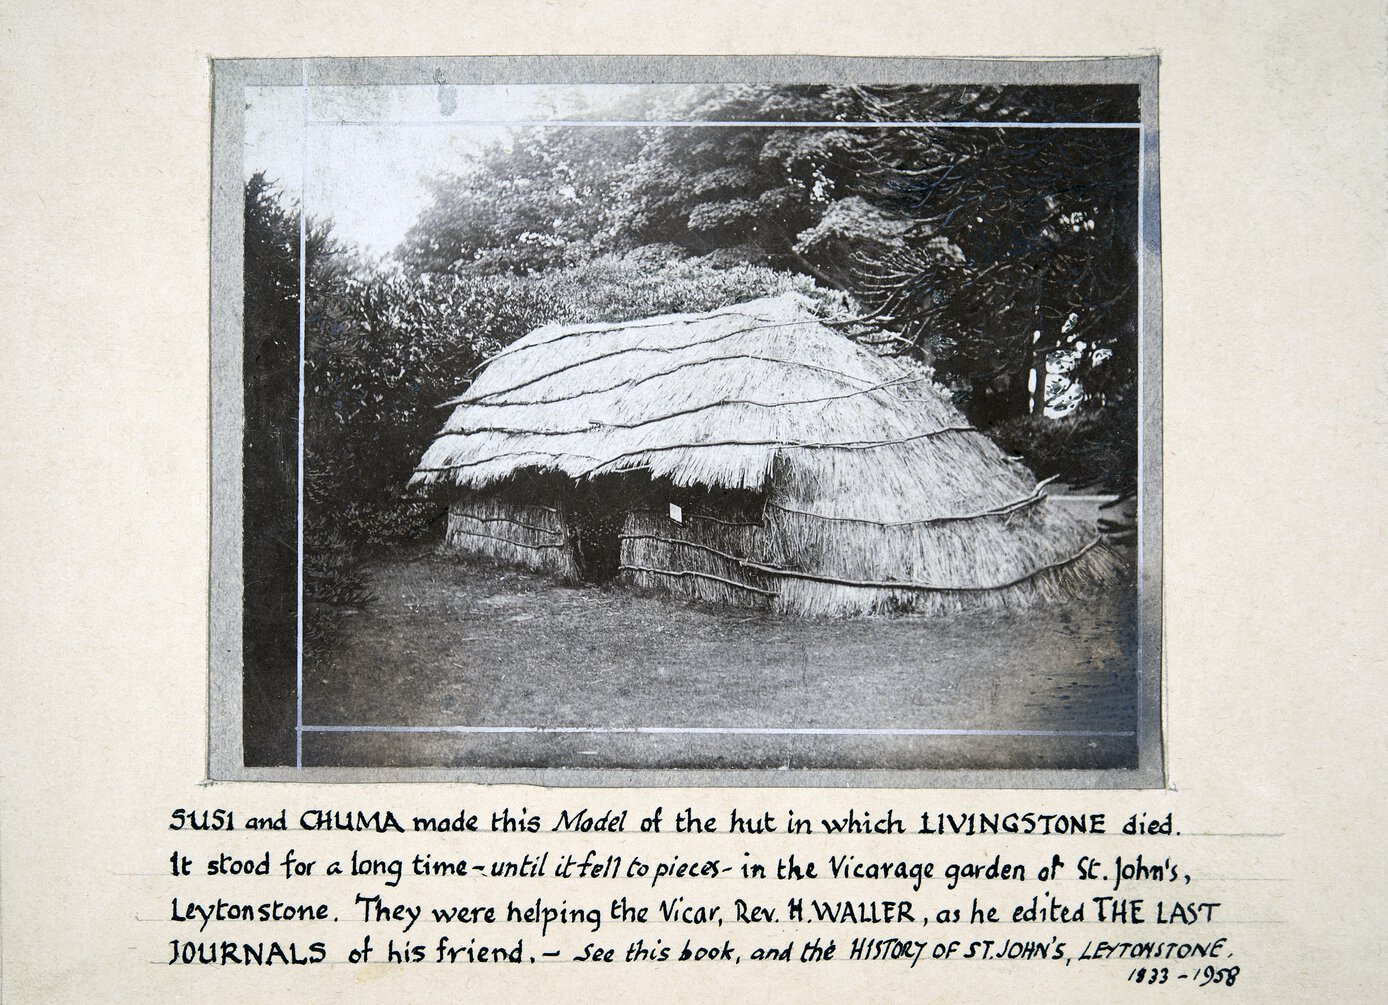 African hut with caption noting that Chuma and Susi made it to model that where D. Livingstone died.